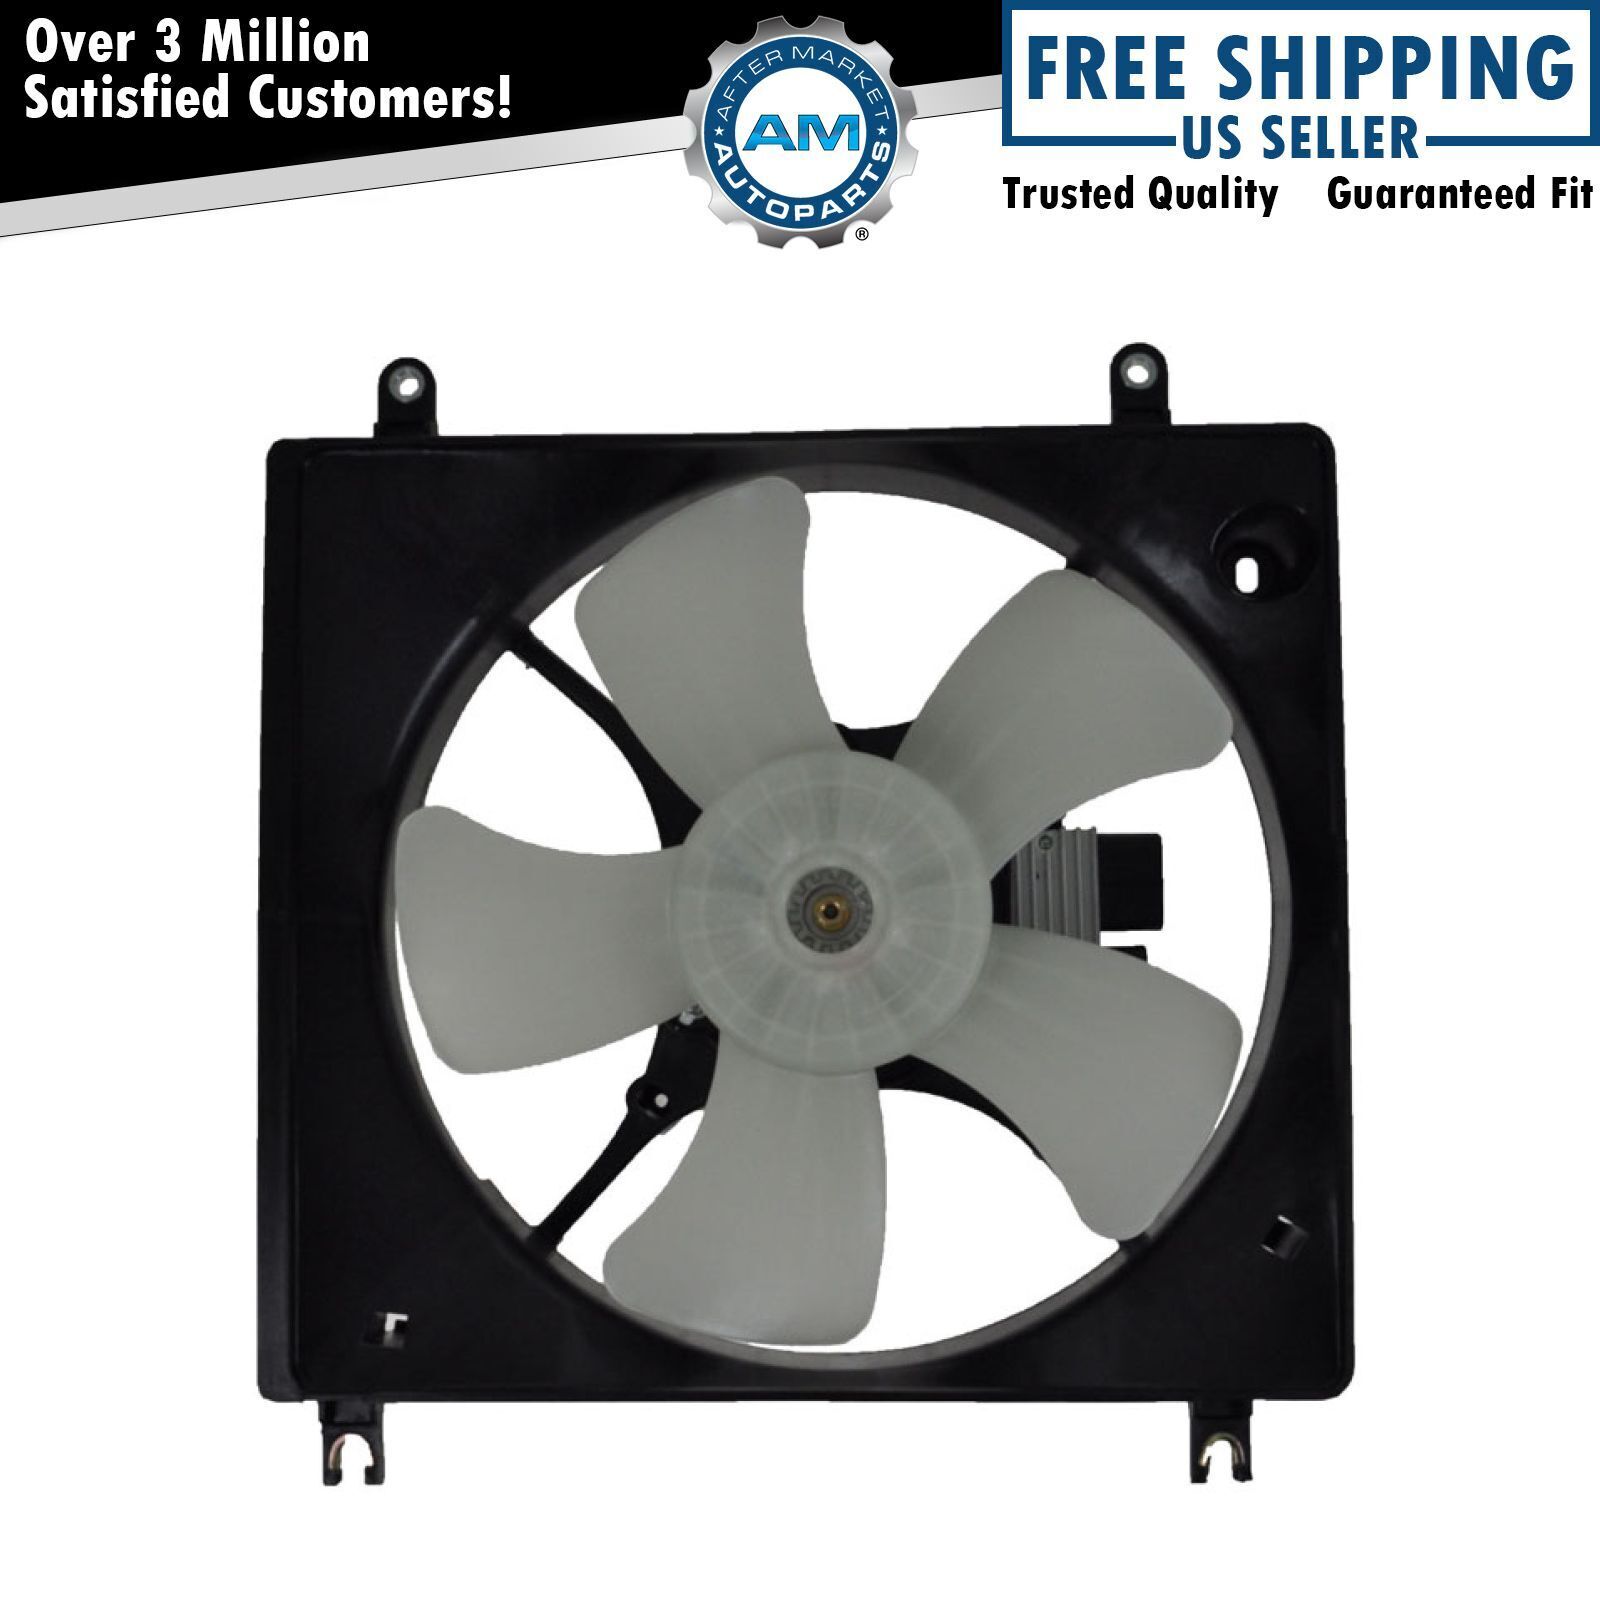 Radiator Cooling Fan assembly for Stratus Eclipse Sebring